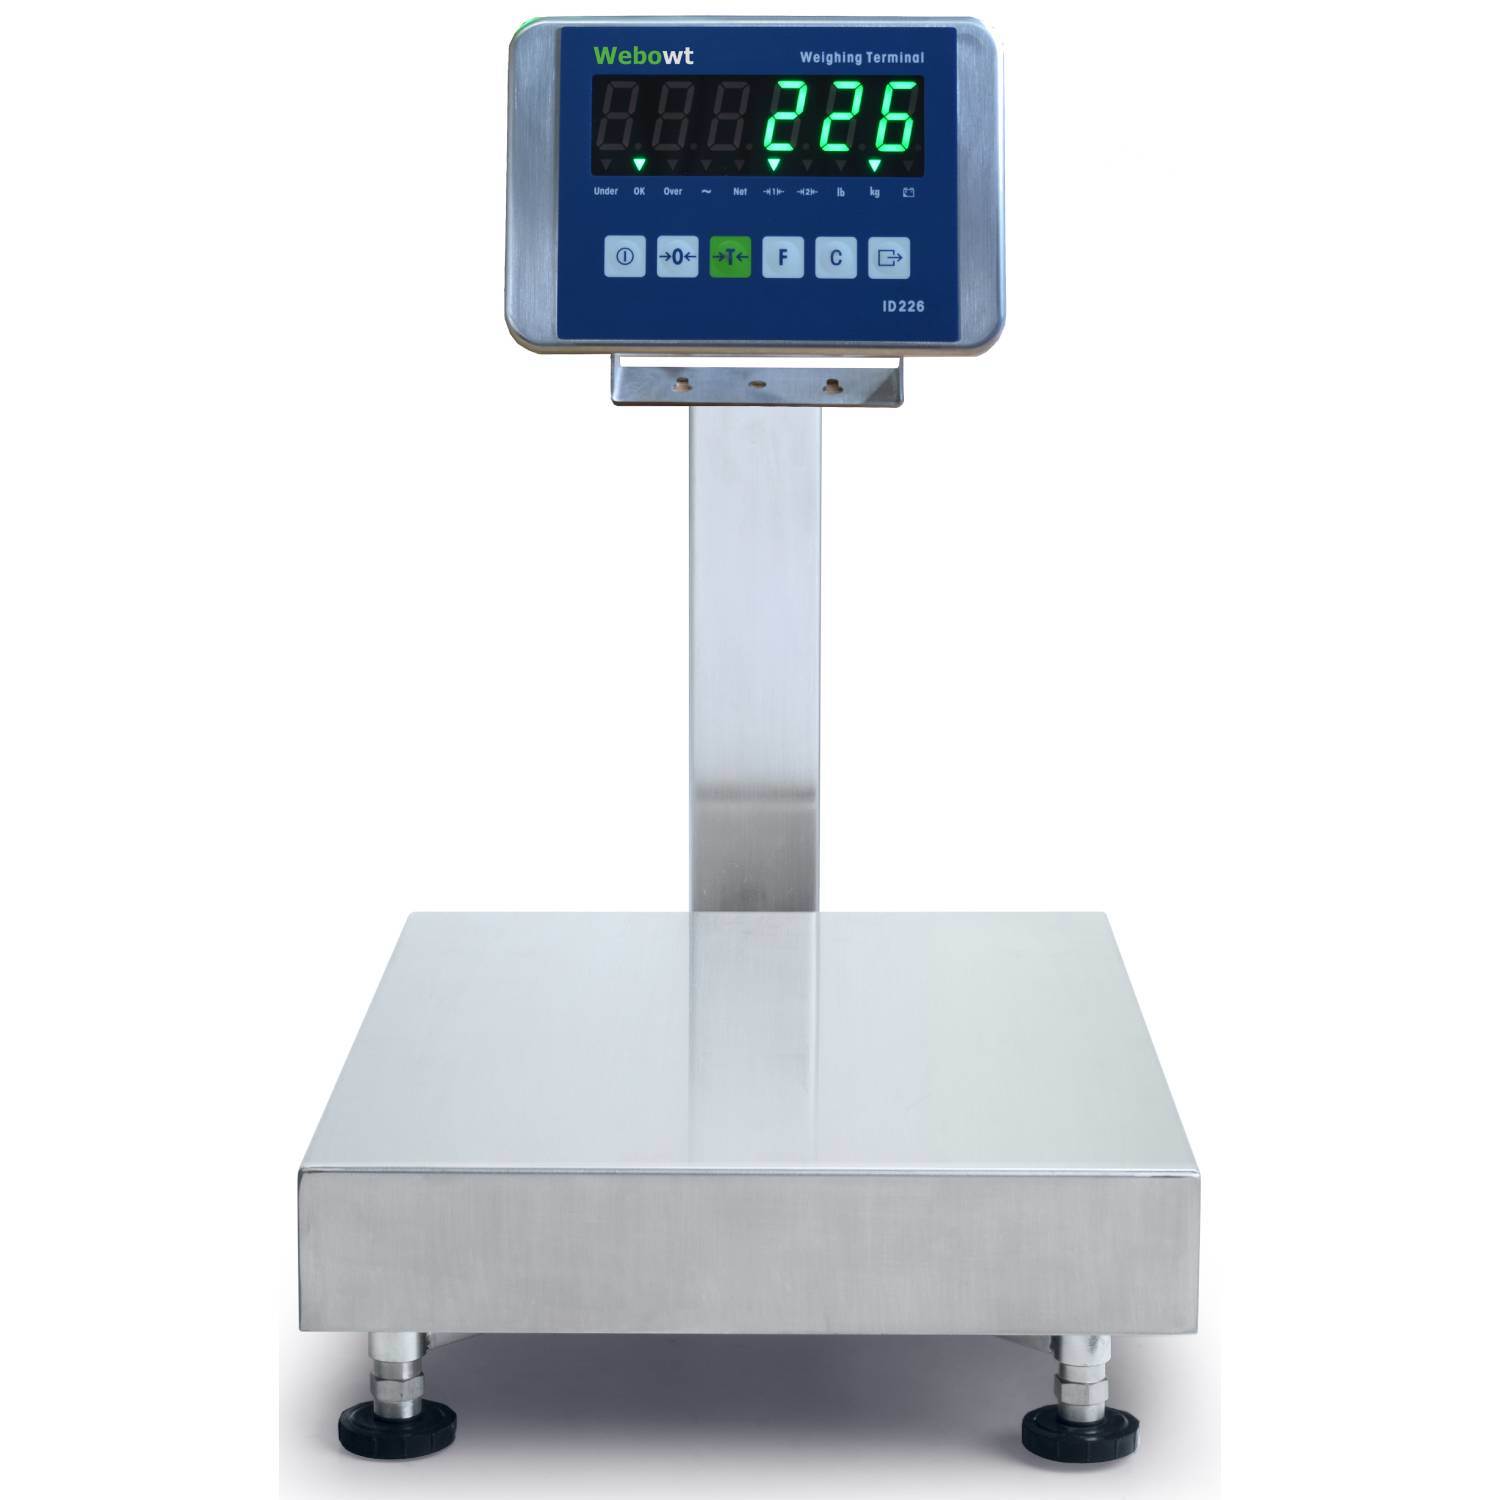 Bench Scale RKA-ID226